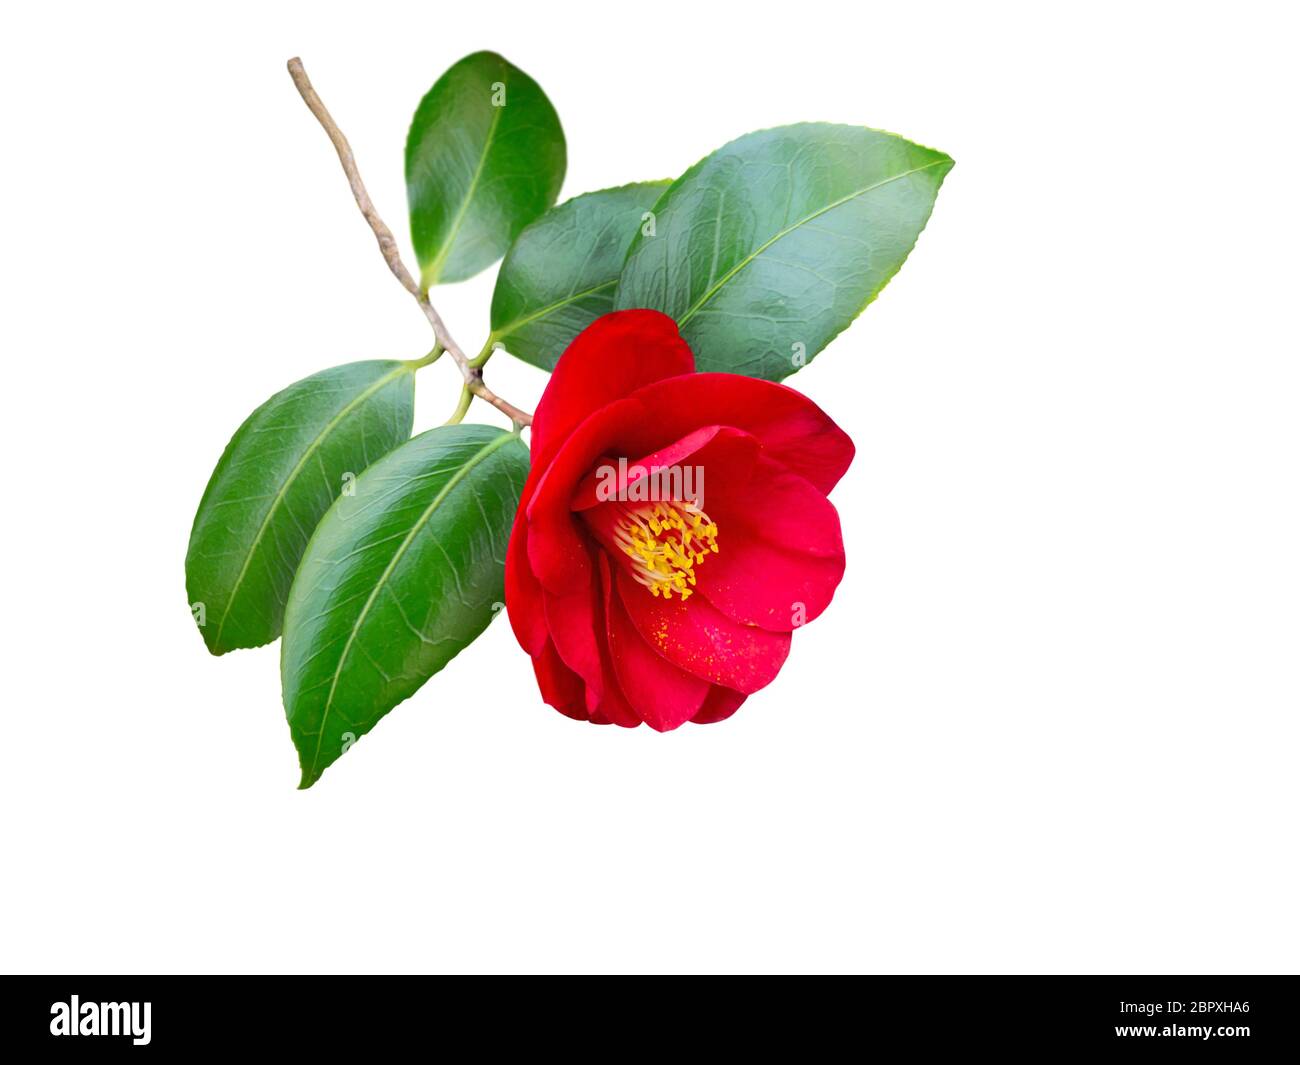 Red camellia japonica semi-double form flower and leaves isolated on white. Japanese tsubaki. Chinese symbol of love. Stock Photo